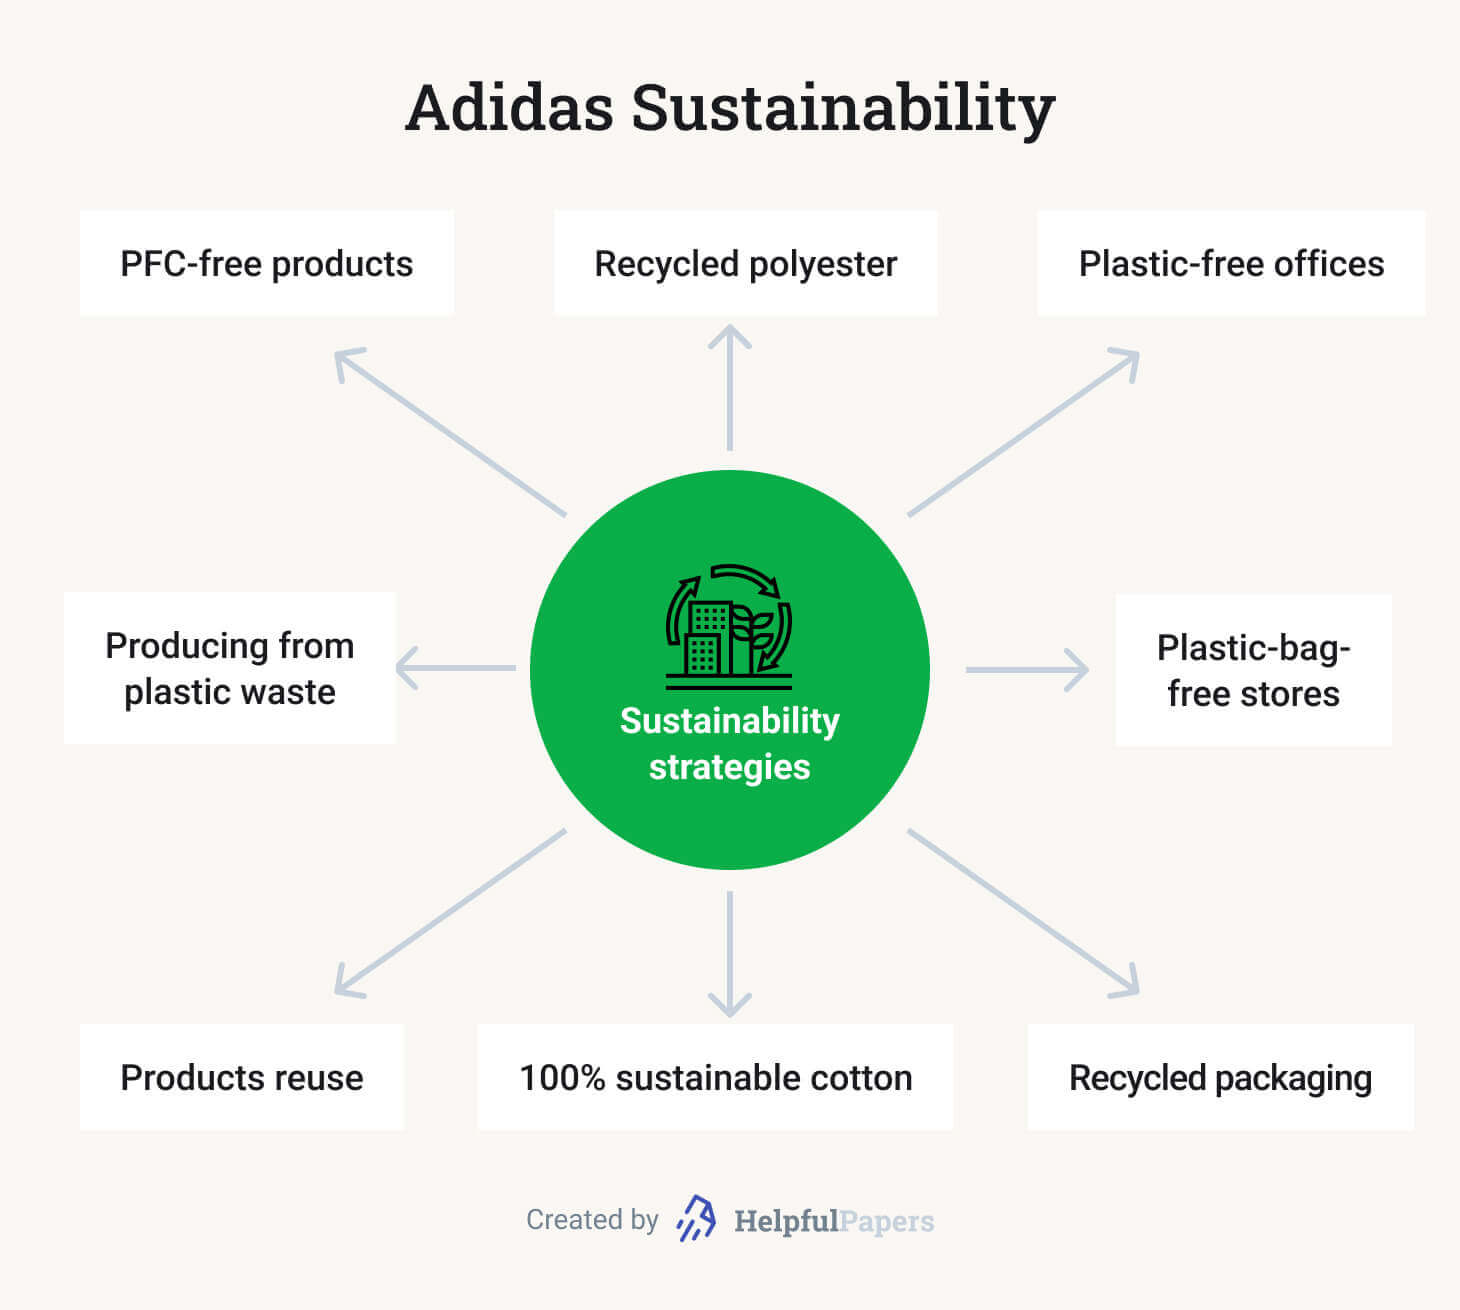 The picture lists the main sustainability strategies of Adidas.